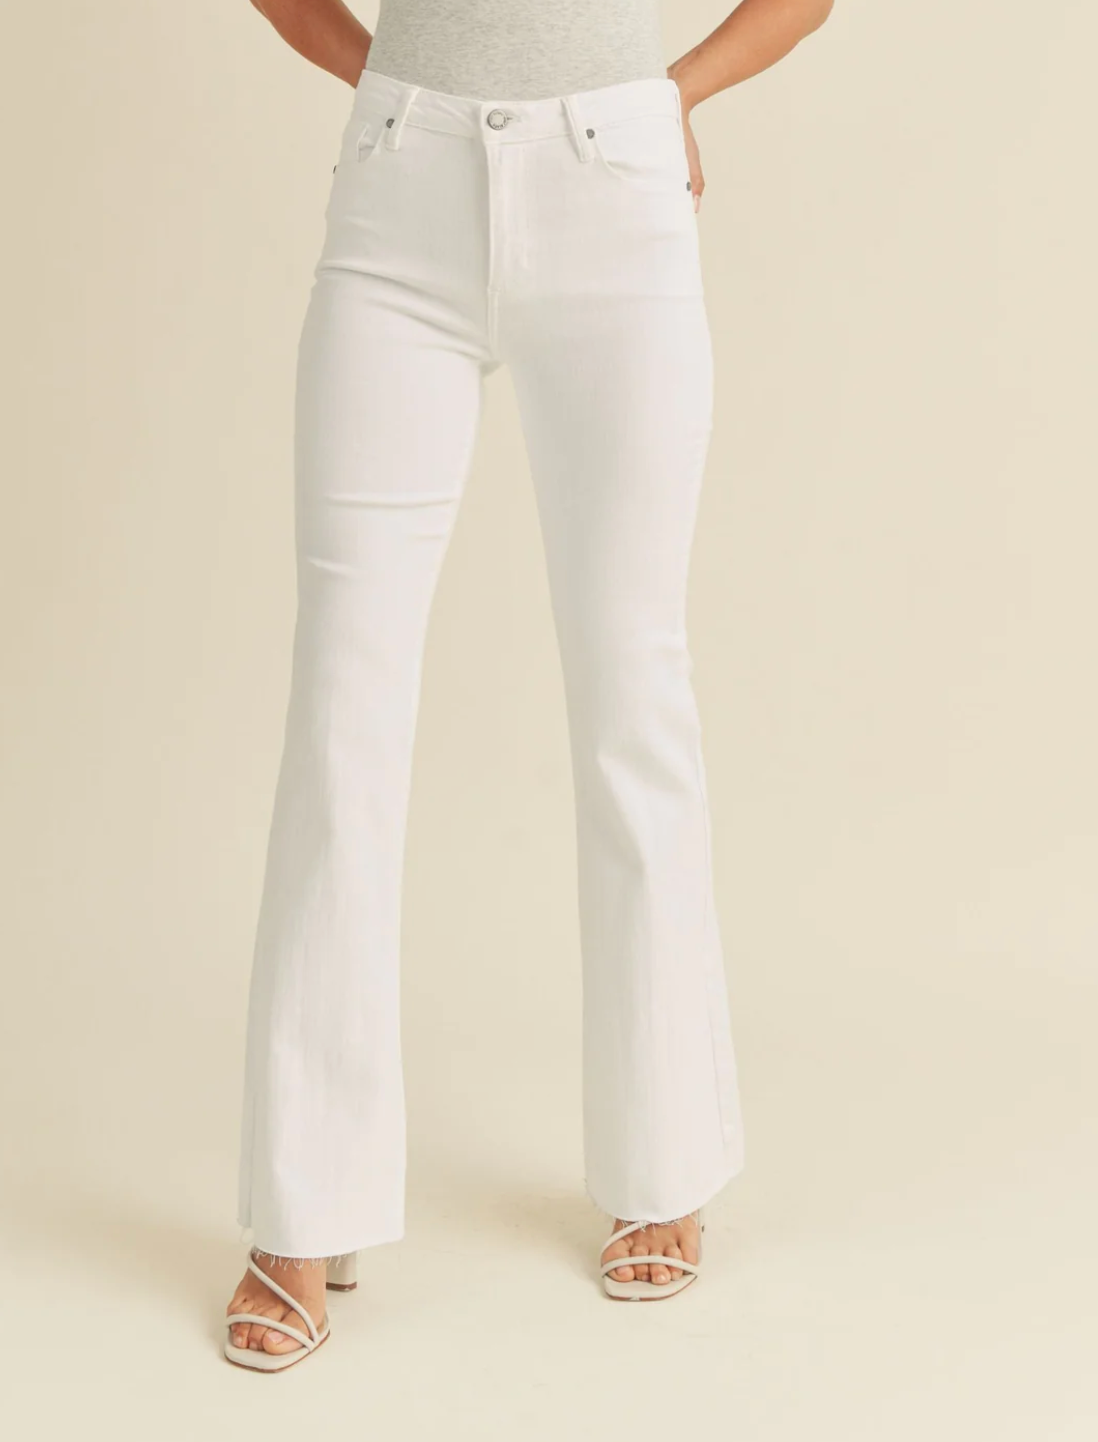 The Flare Jeans in Optic White